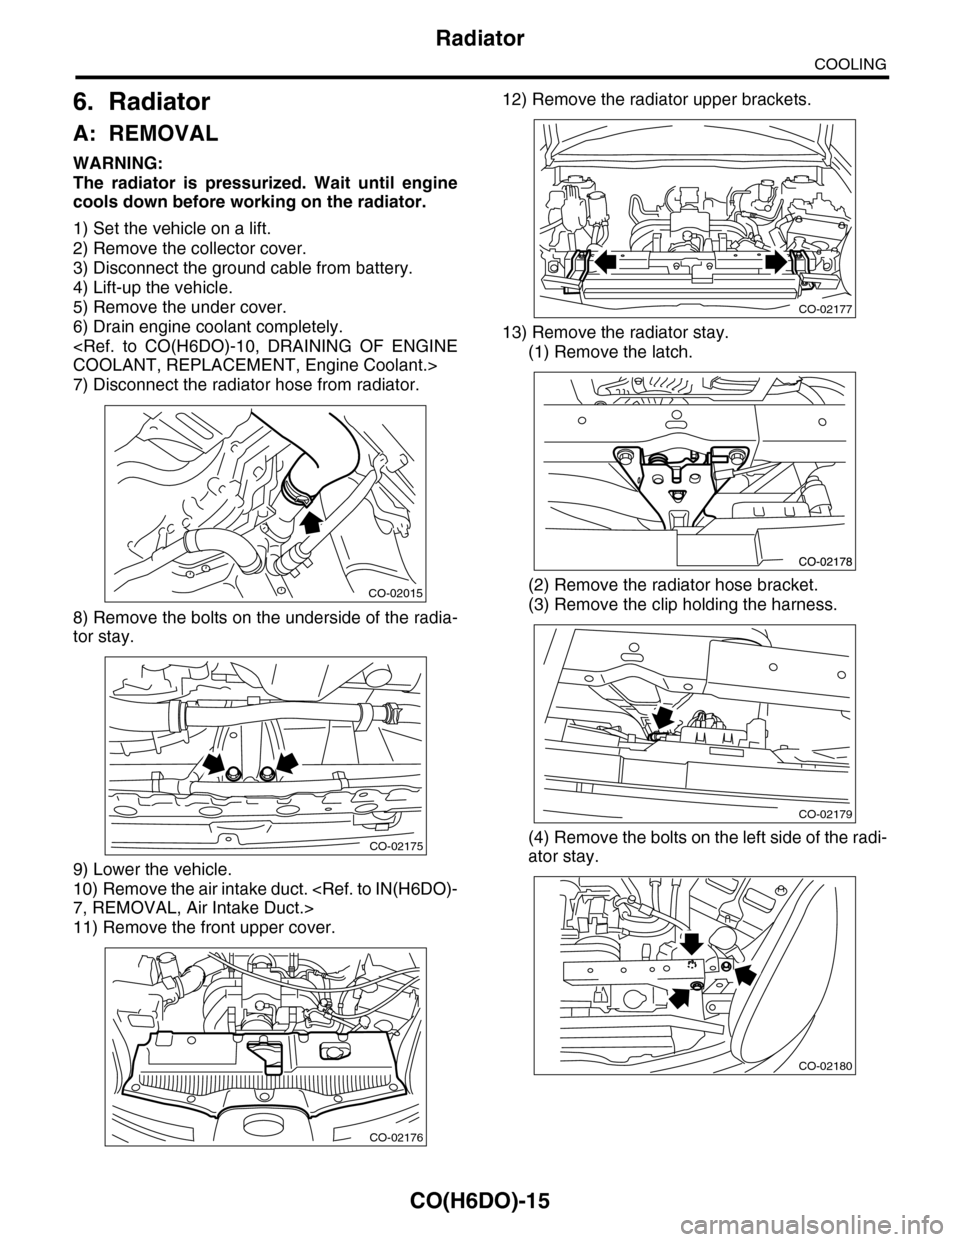 SUBARU TRIBECA 2009 1.G Service Workshop Manual CO(H6DO)-15
Radiator
COOLING
6. Radiator
A: REMOVAL
WARNING:
The  radiator  is  pressurized.  Wait  until  engine
cools down before working on the radiator.
1) Set the vehicle on a lift.
2) Remove the